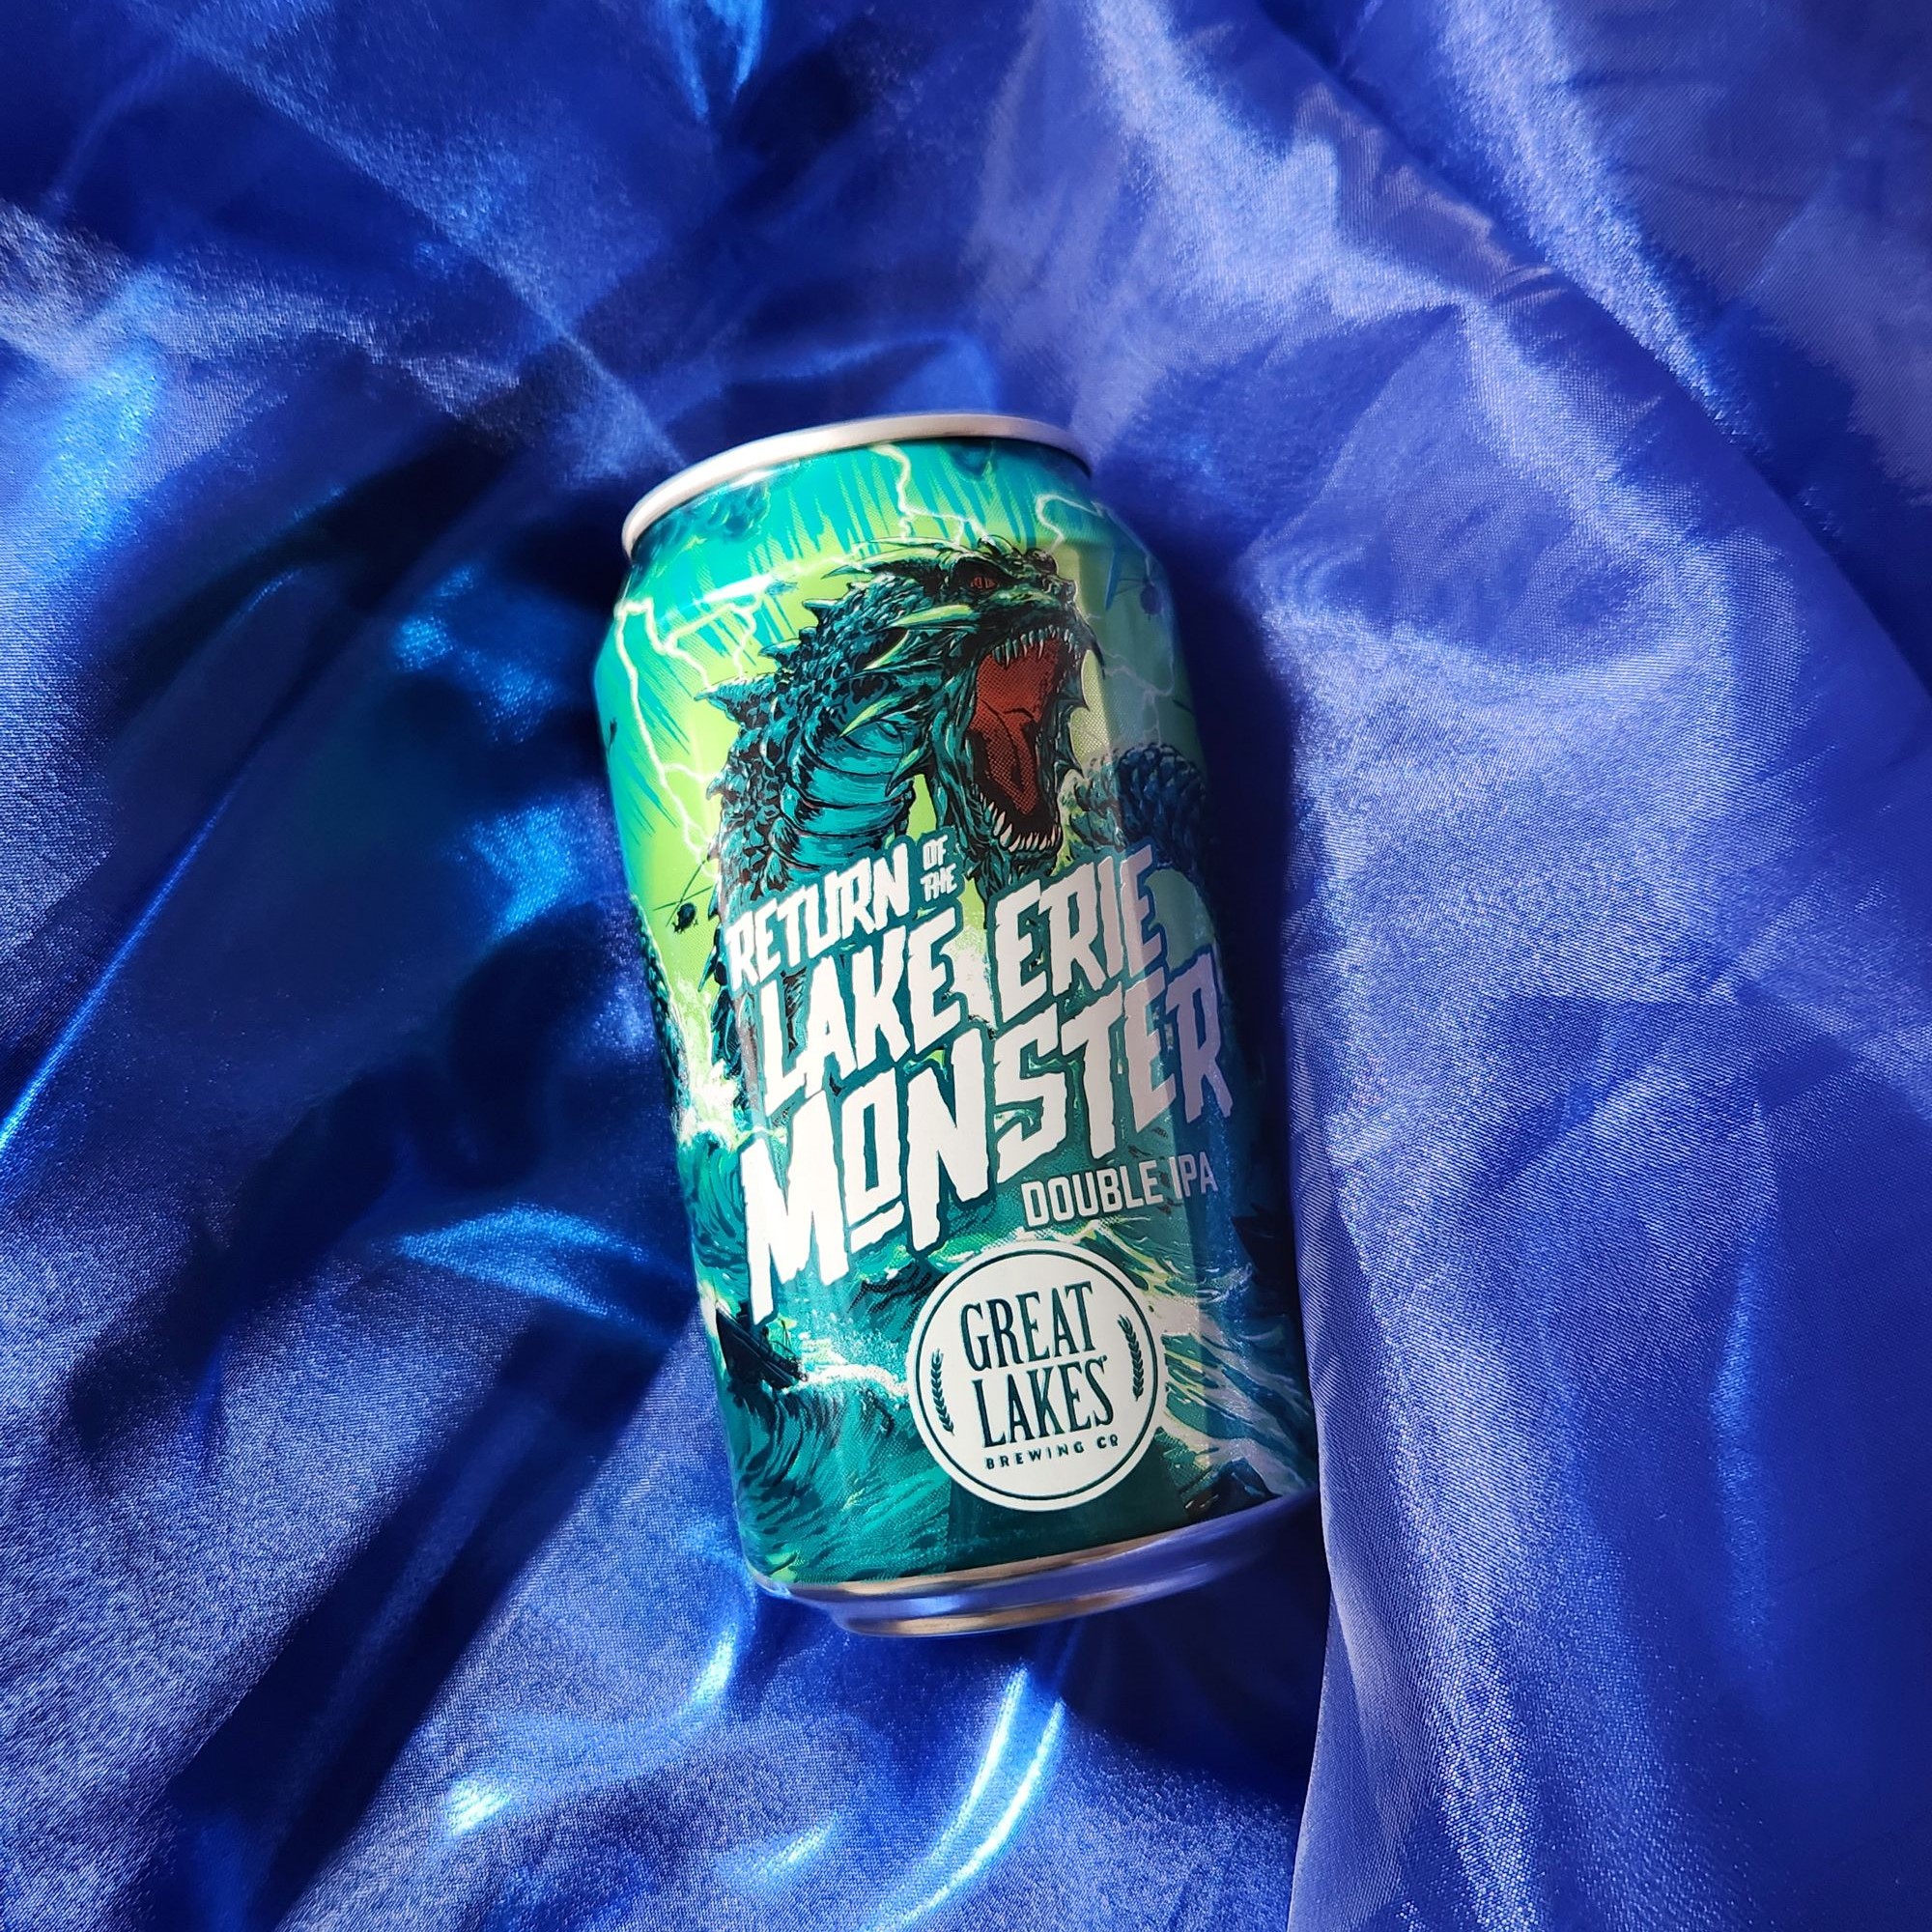 12 oz. Can of Return of the Lake Erie Monster Double IPA laid upon wavy blue fabric.